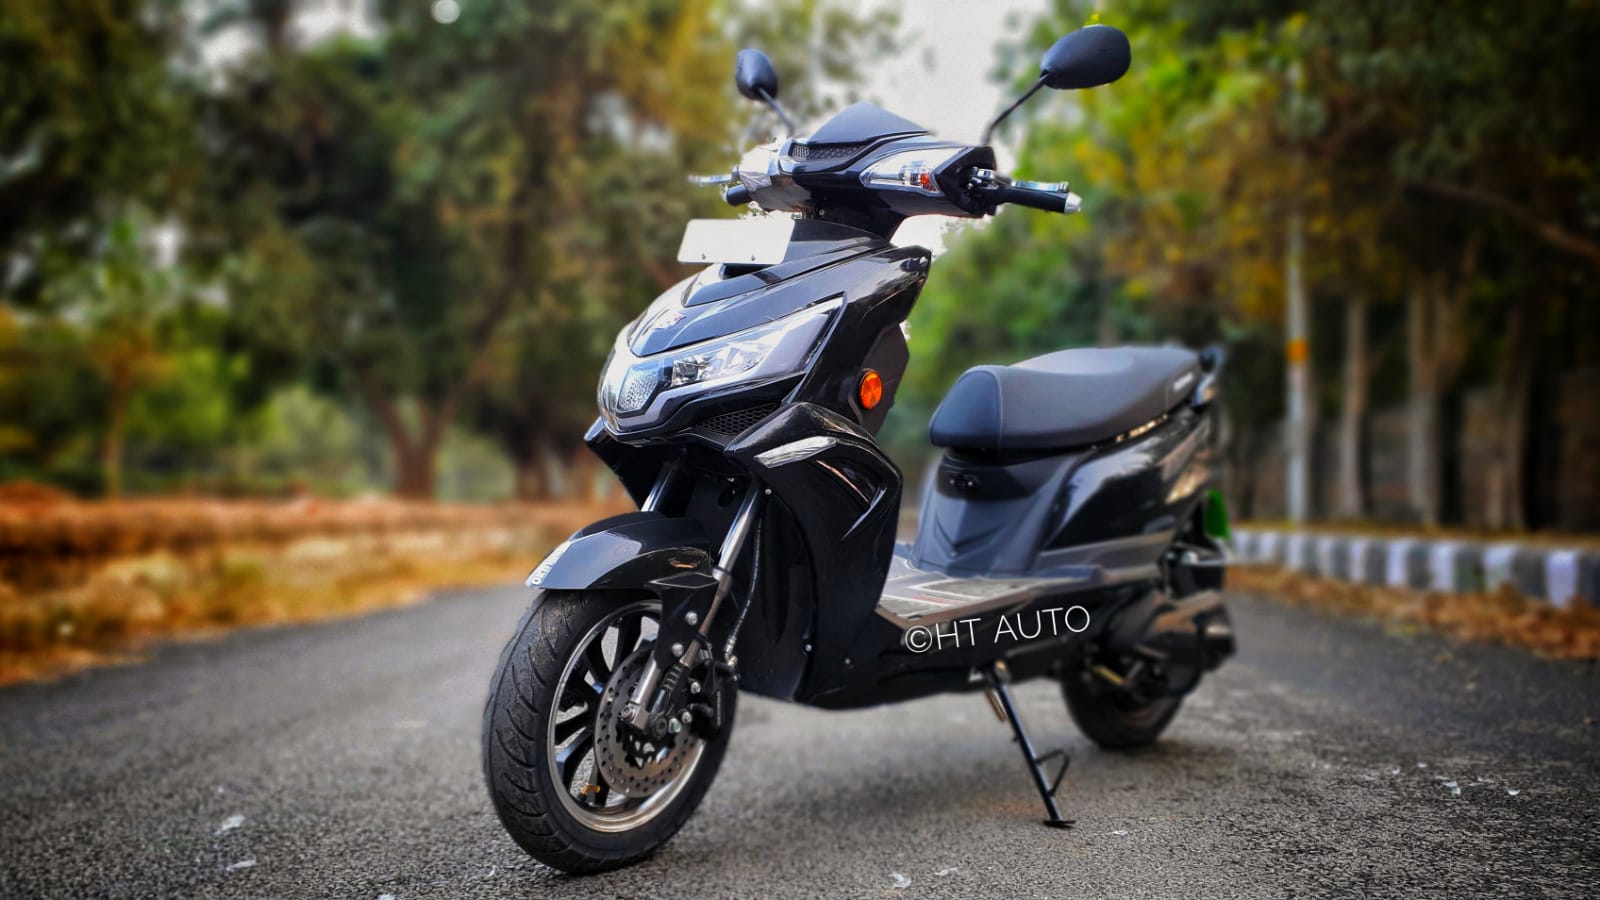 Okinawa started selling Ridge electric scooters in 2017 and has a variety of electric scooters for private and commercial use